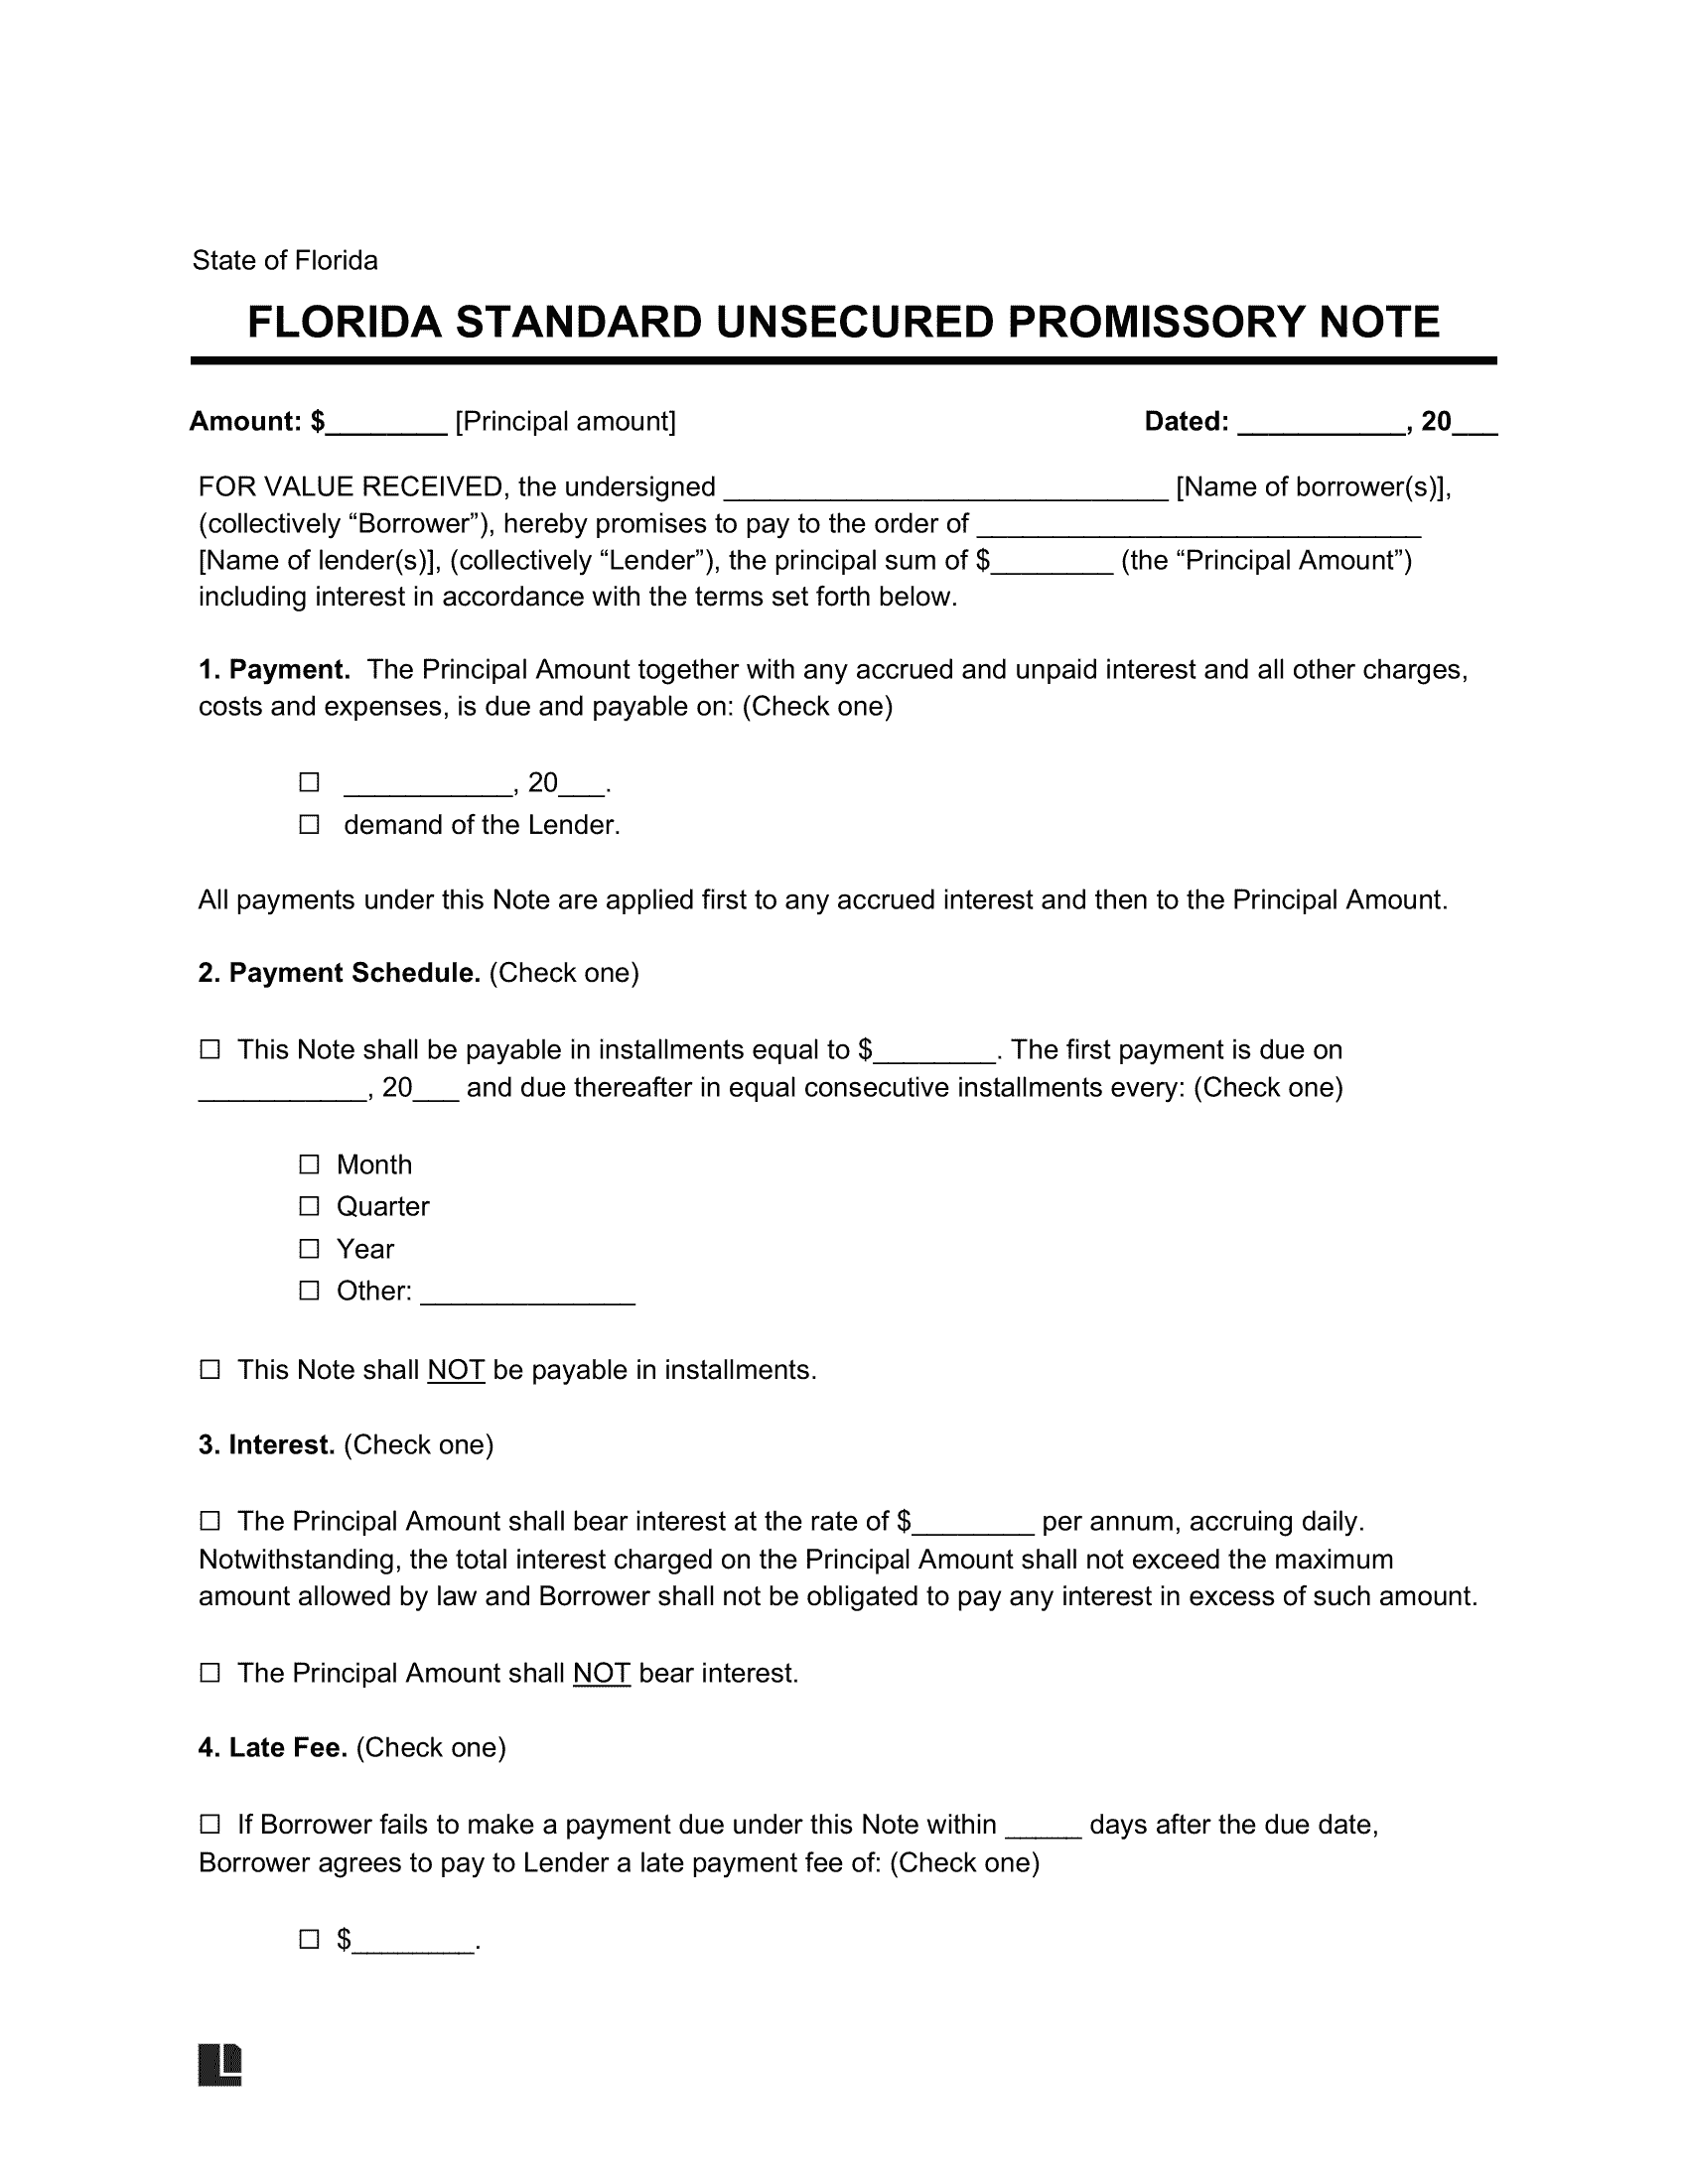 assignment of promissory note florida